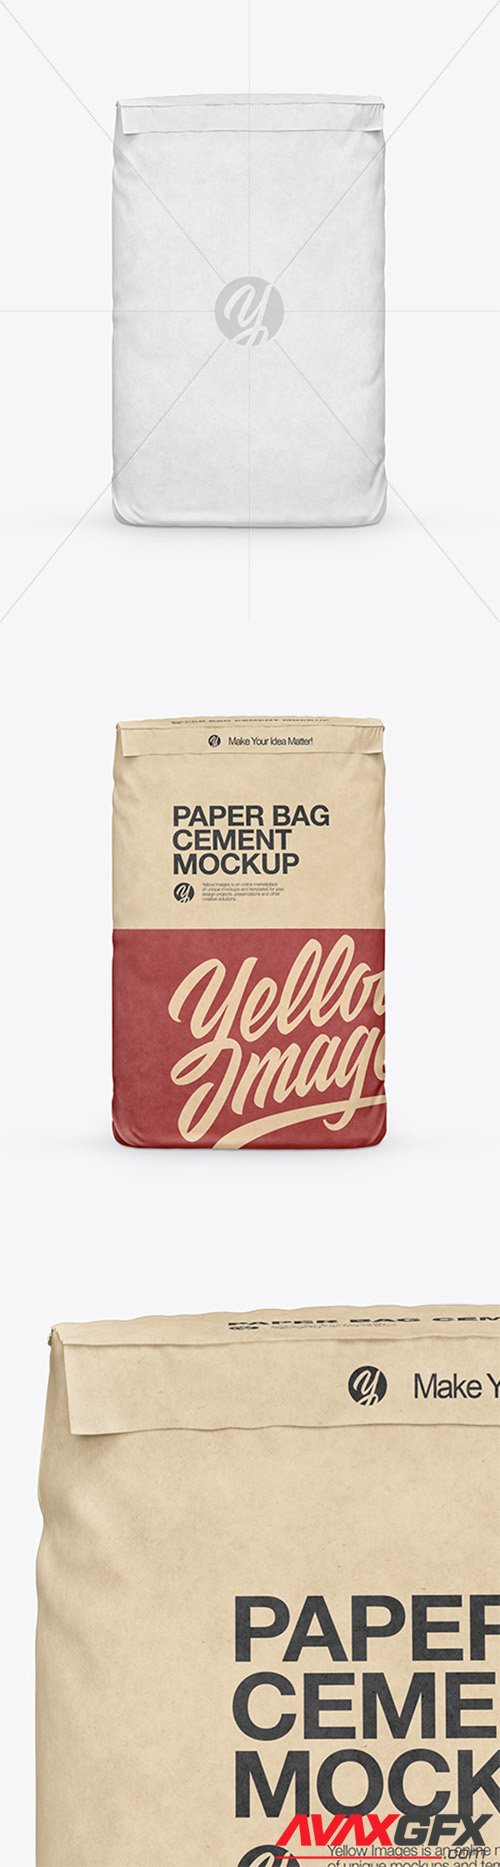 Download Kraft Cement Bag Mockup 51933 » AVAXGFX - All Downloads that You Need in One Place! Graphic from ...